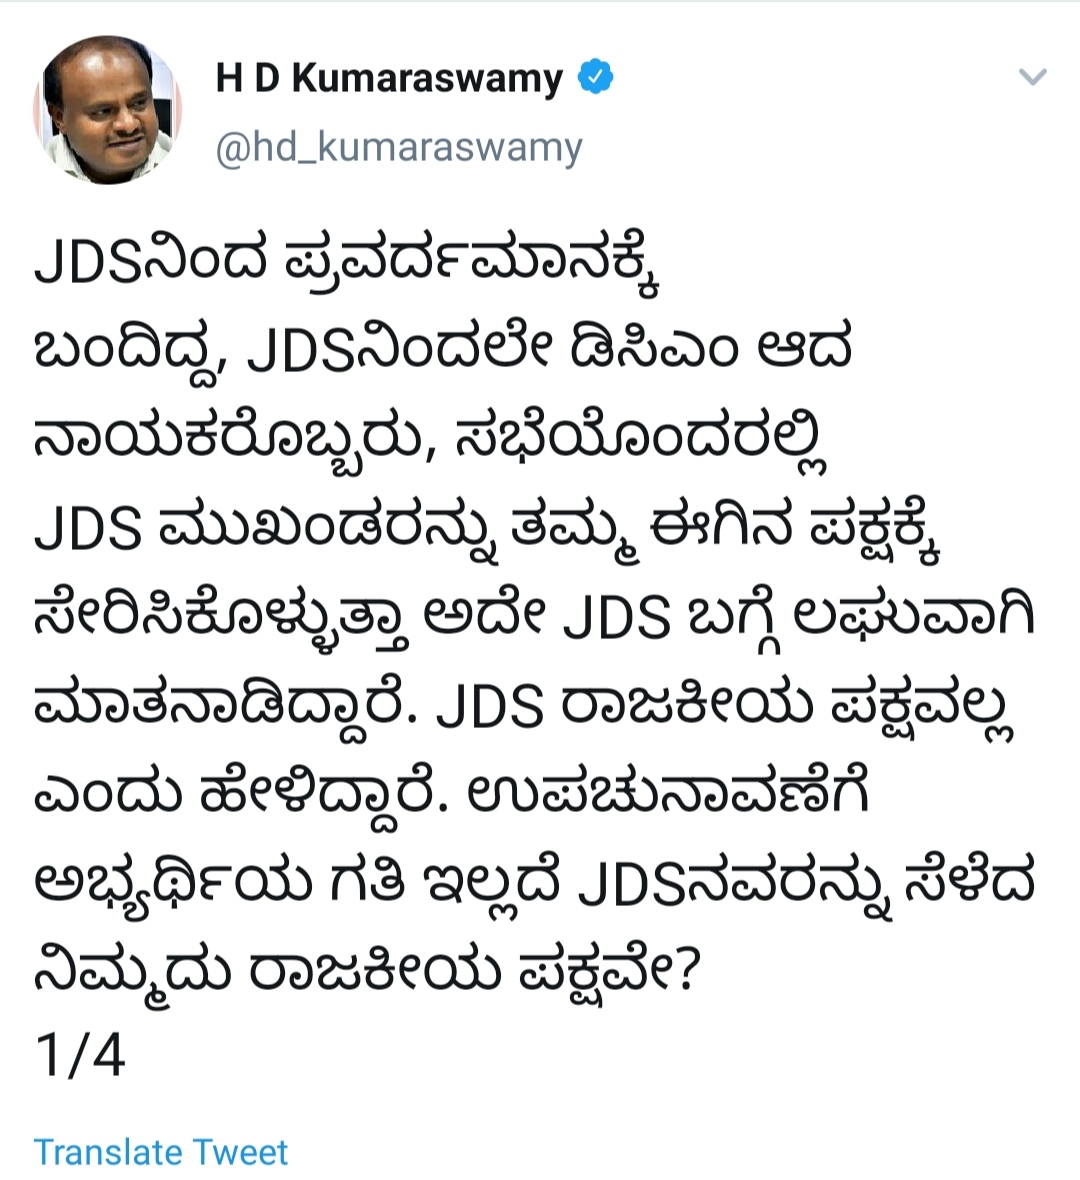 HD kumarswamy outrage against siddaramaiah in twitter